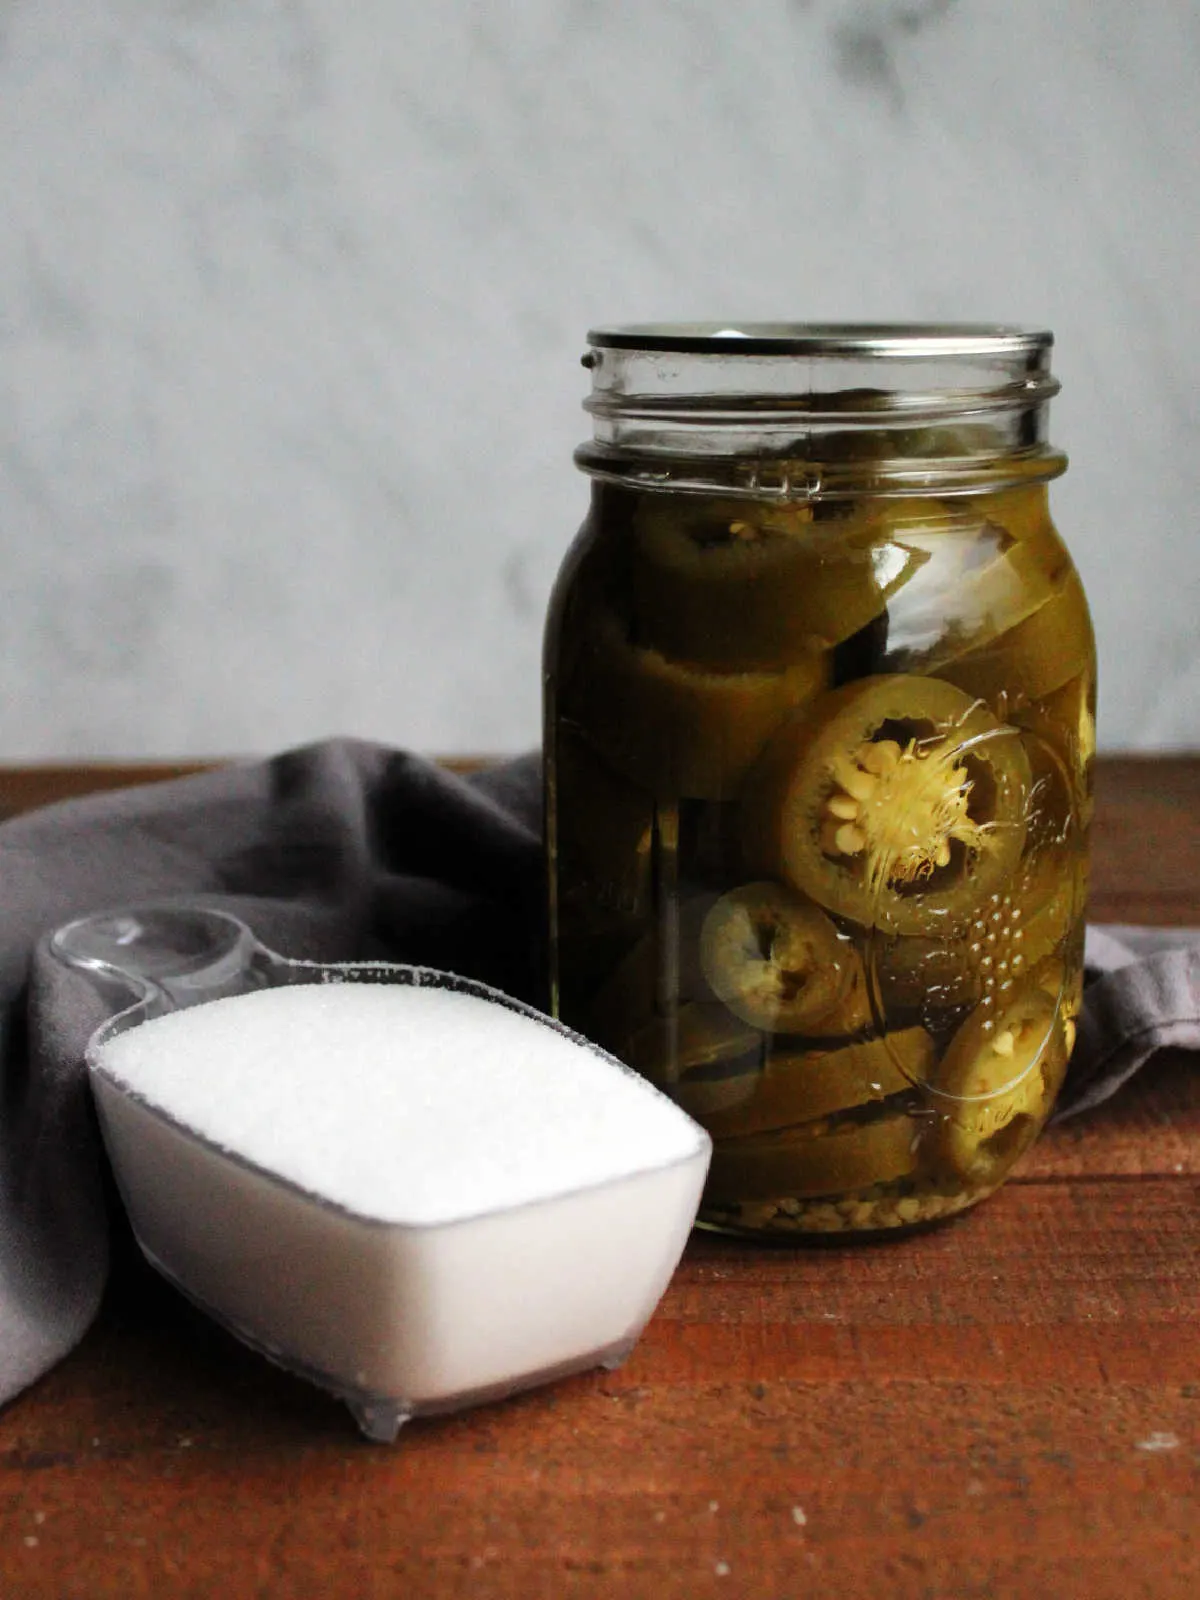 Candied jalapeno ingredients: a jar of pickled jalapenos and white sugar.